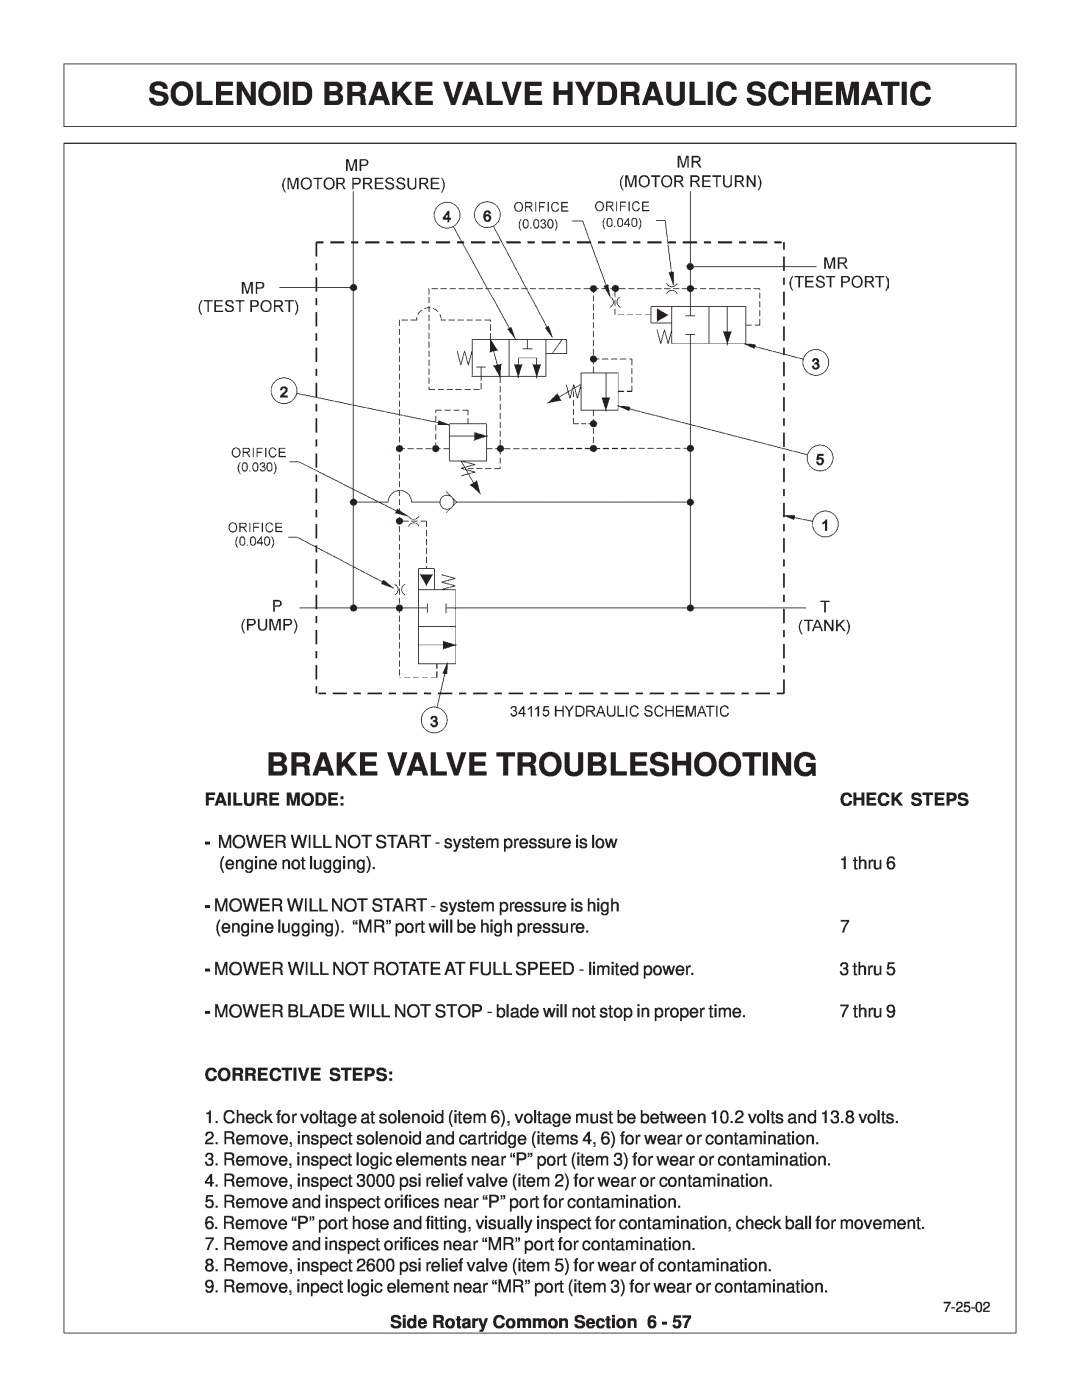 Tiger Products Co., Ltd TS 100A manual Solenoid Brake Valve Hydraulic Schematic, Brake Valve Troubleshooting 